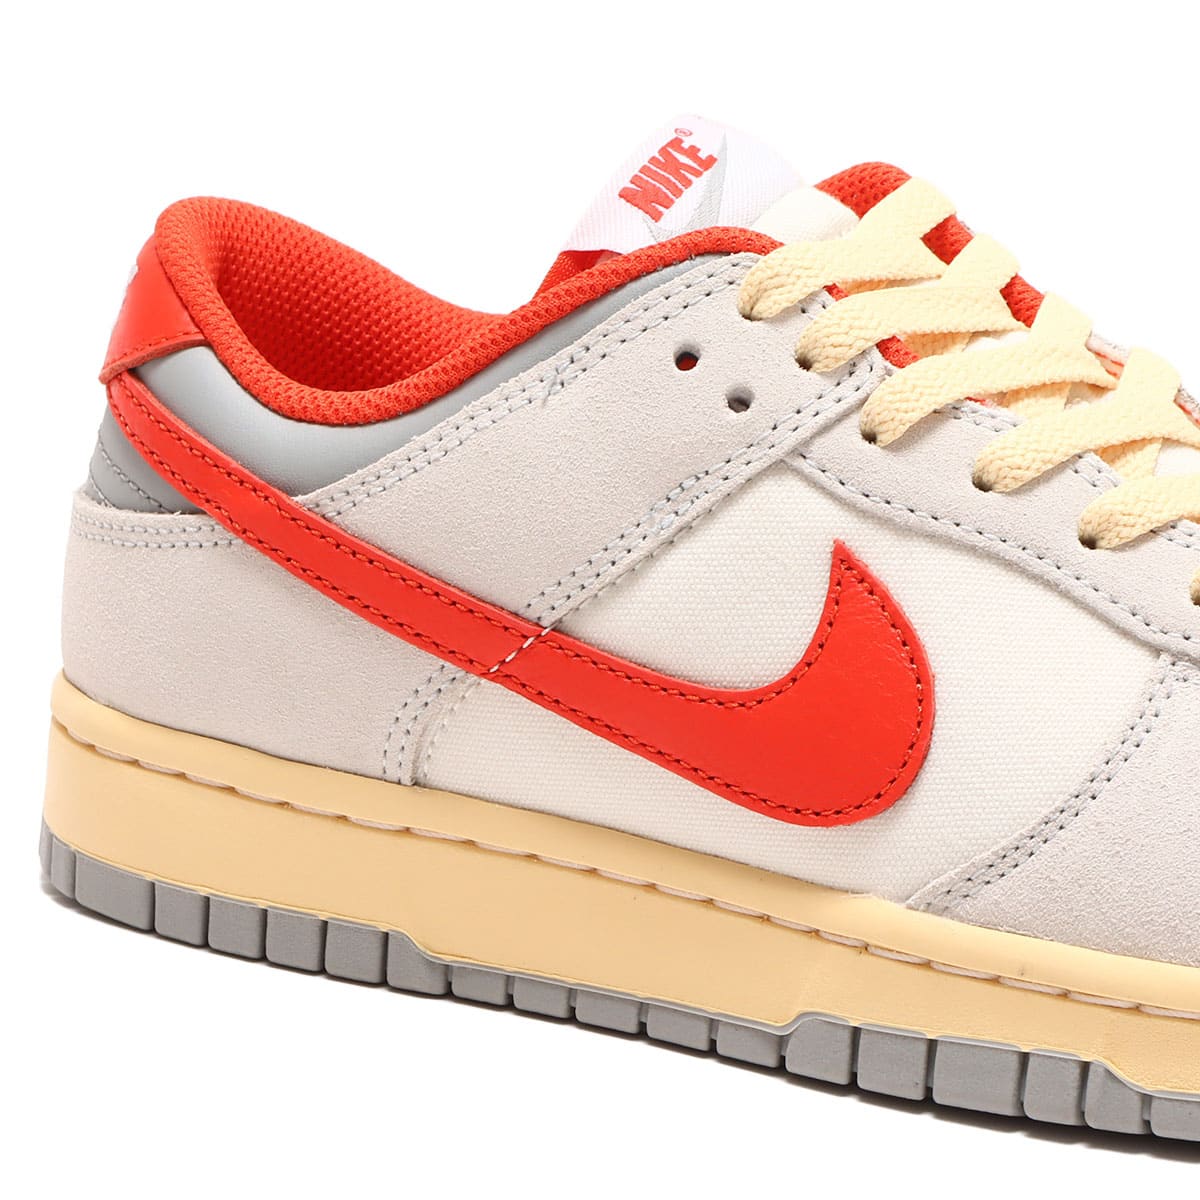 NIKE DUNK LOW SAIL/PICANTE RED-PHOTON DUST 23SU-I